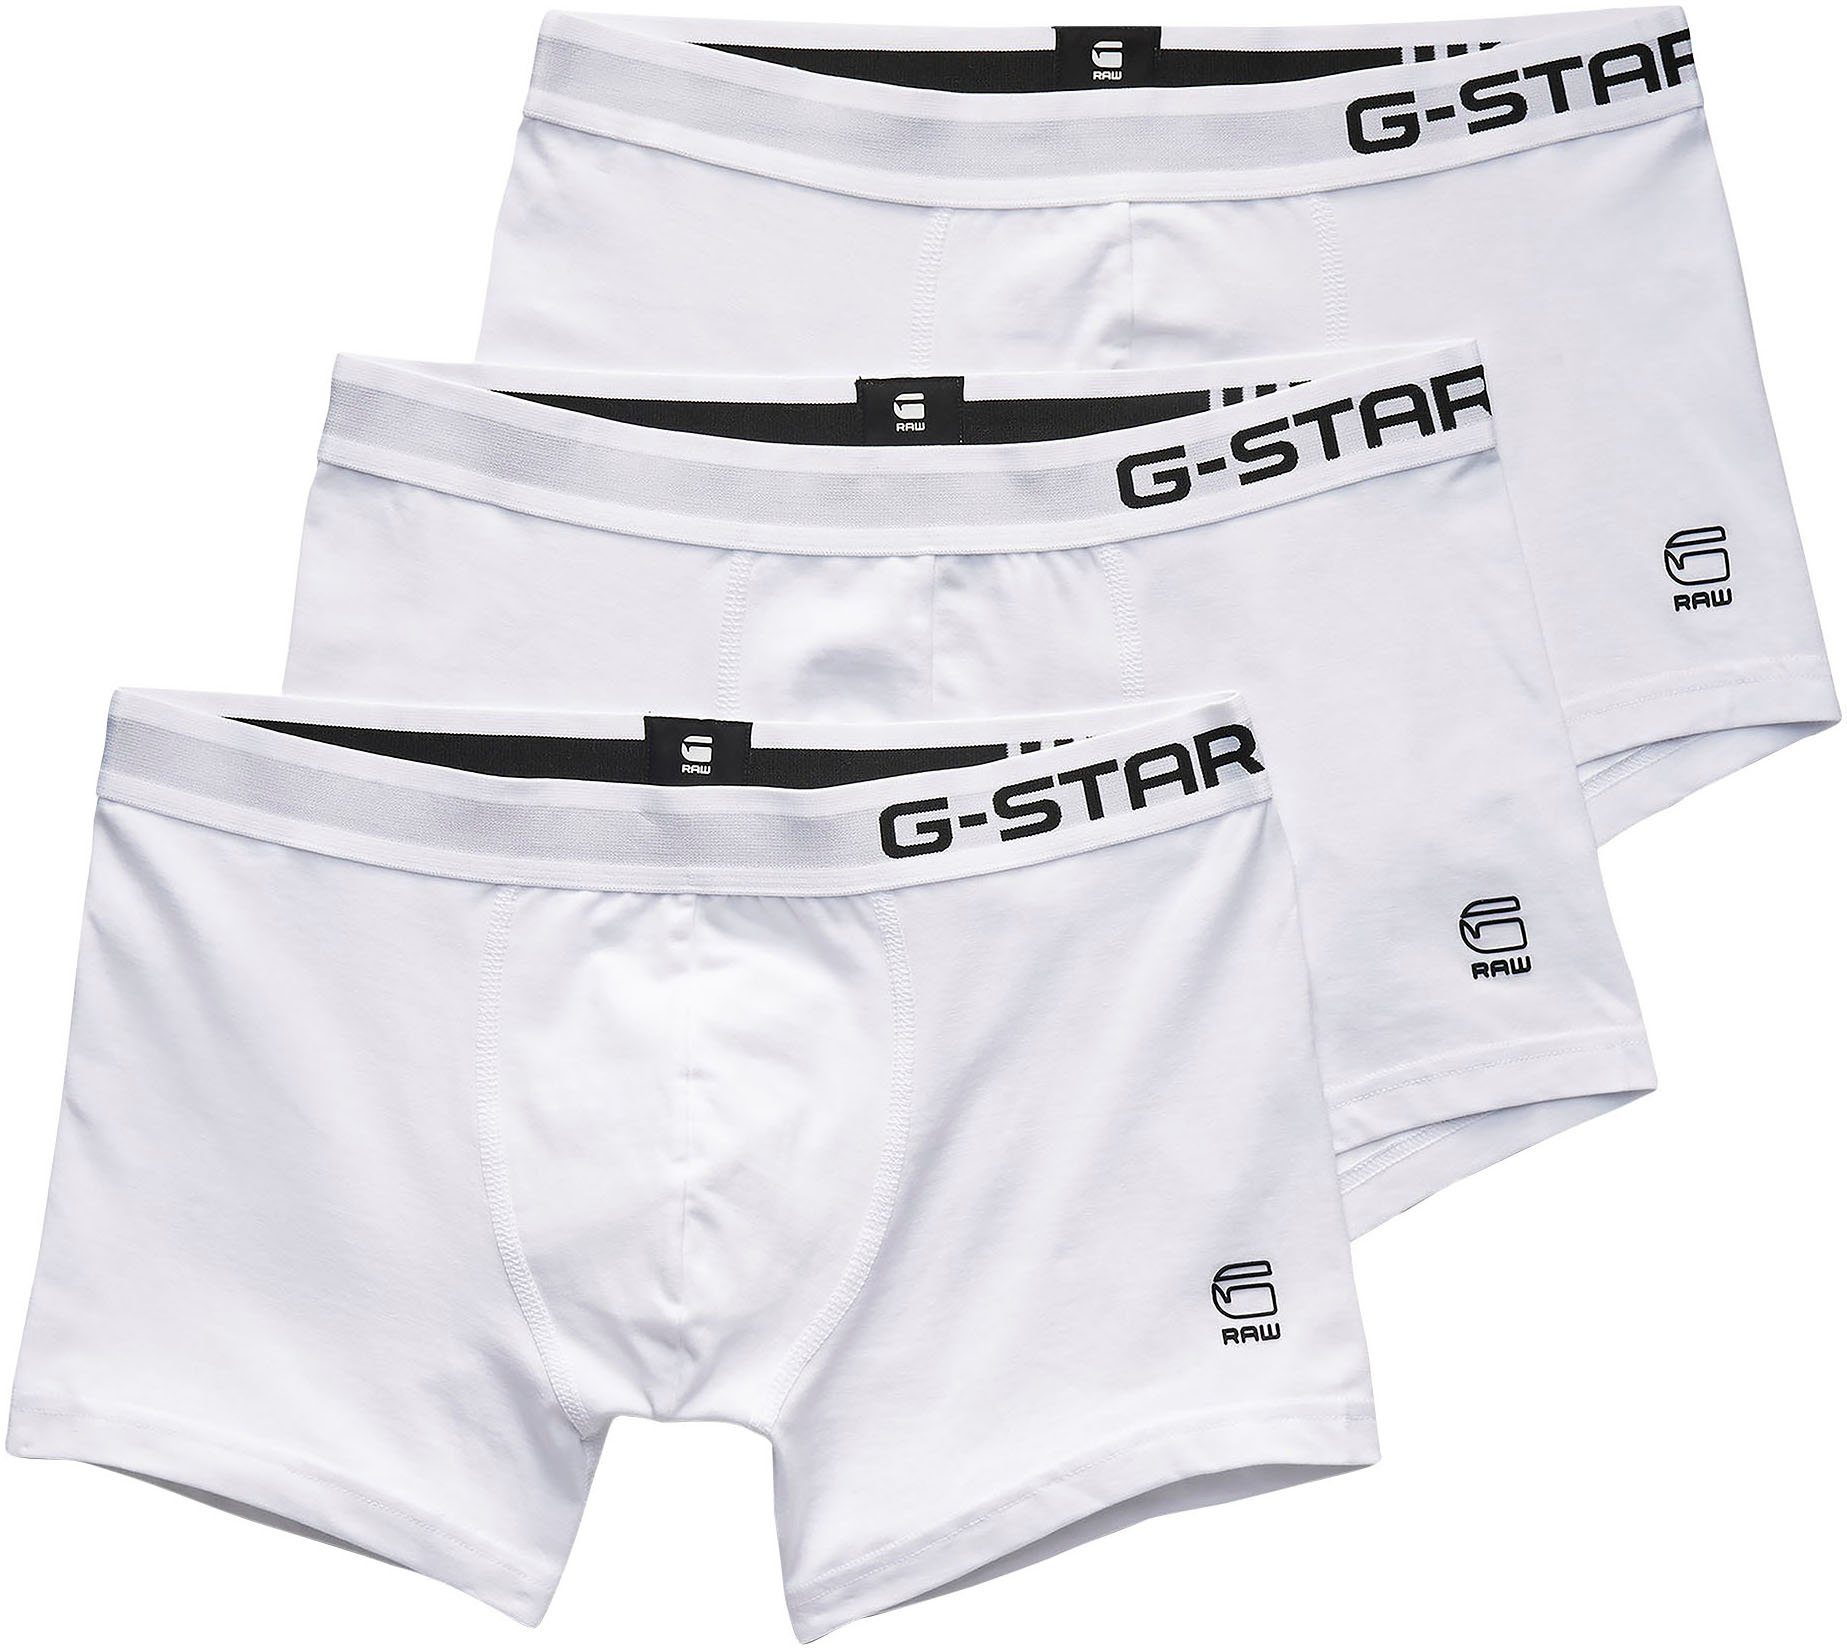 G-Star RAW Boxer Classic trunk 3 pack (Packung, 3-St., 3er-Pack) weiß